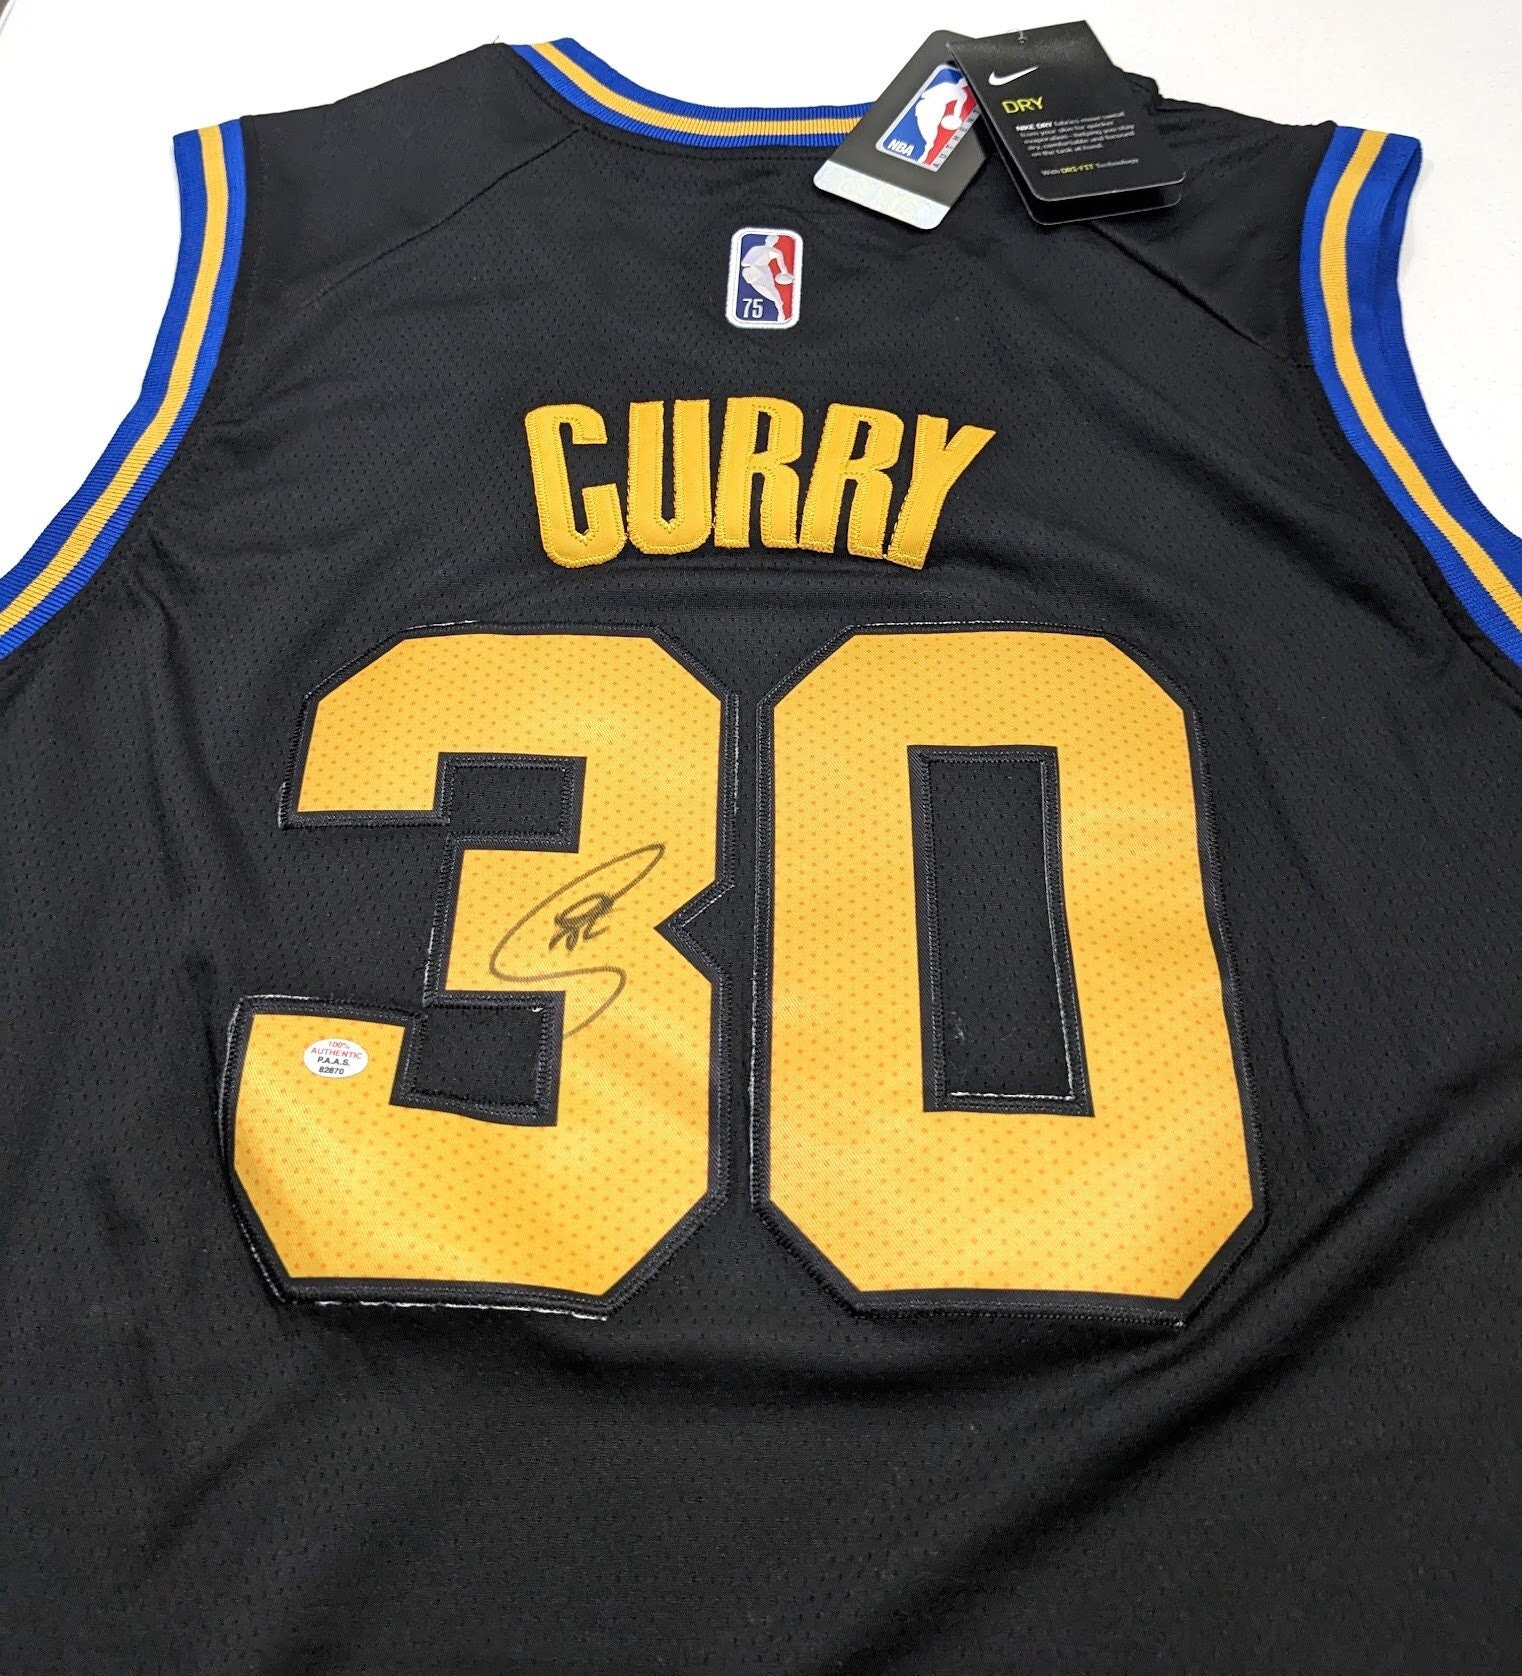 1995 GOLDEN STATE WARRIORS SMITH #32 CHAMPION JERSEY (AWAY) S